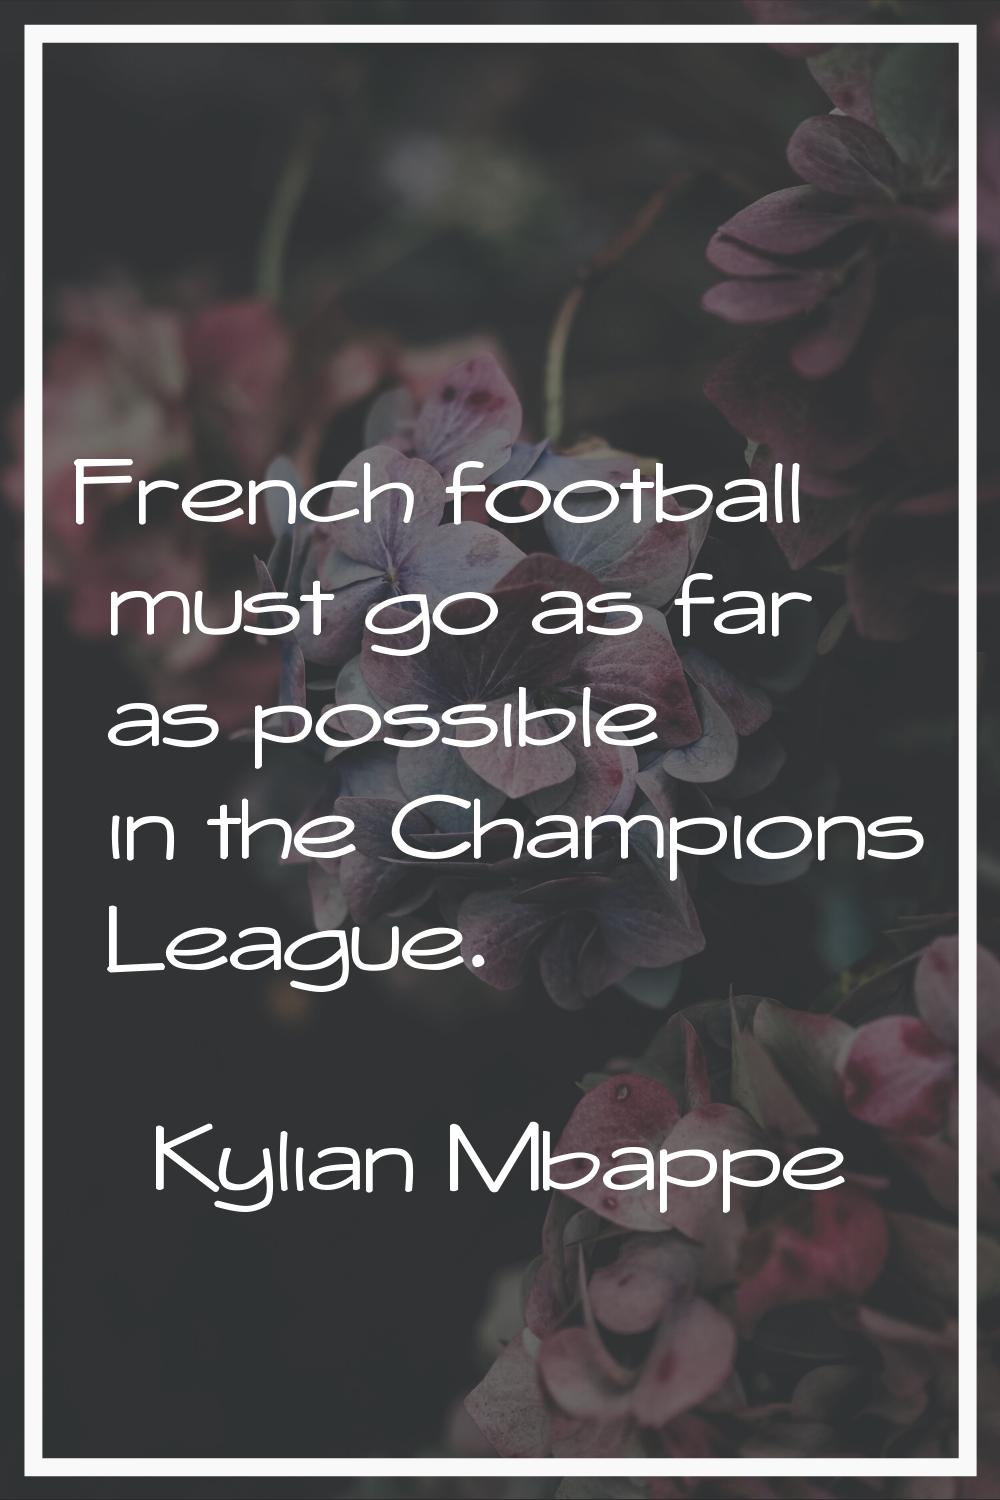 French football must go as far as possible in the Champions League.